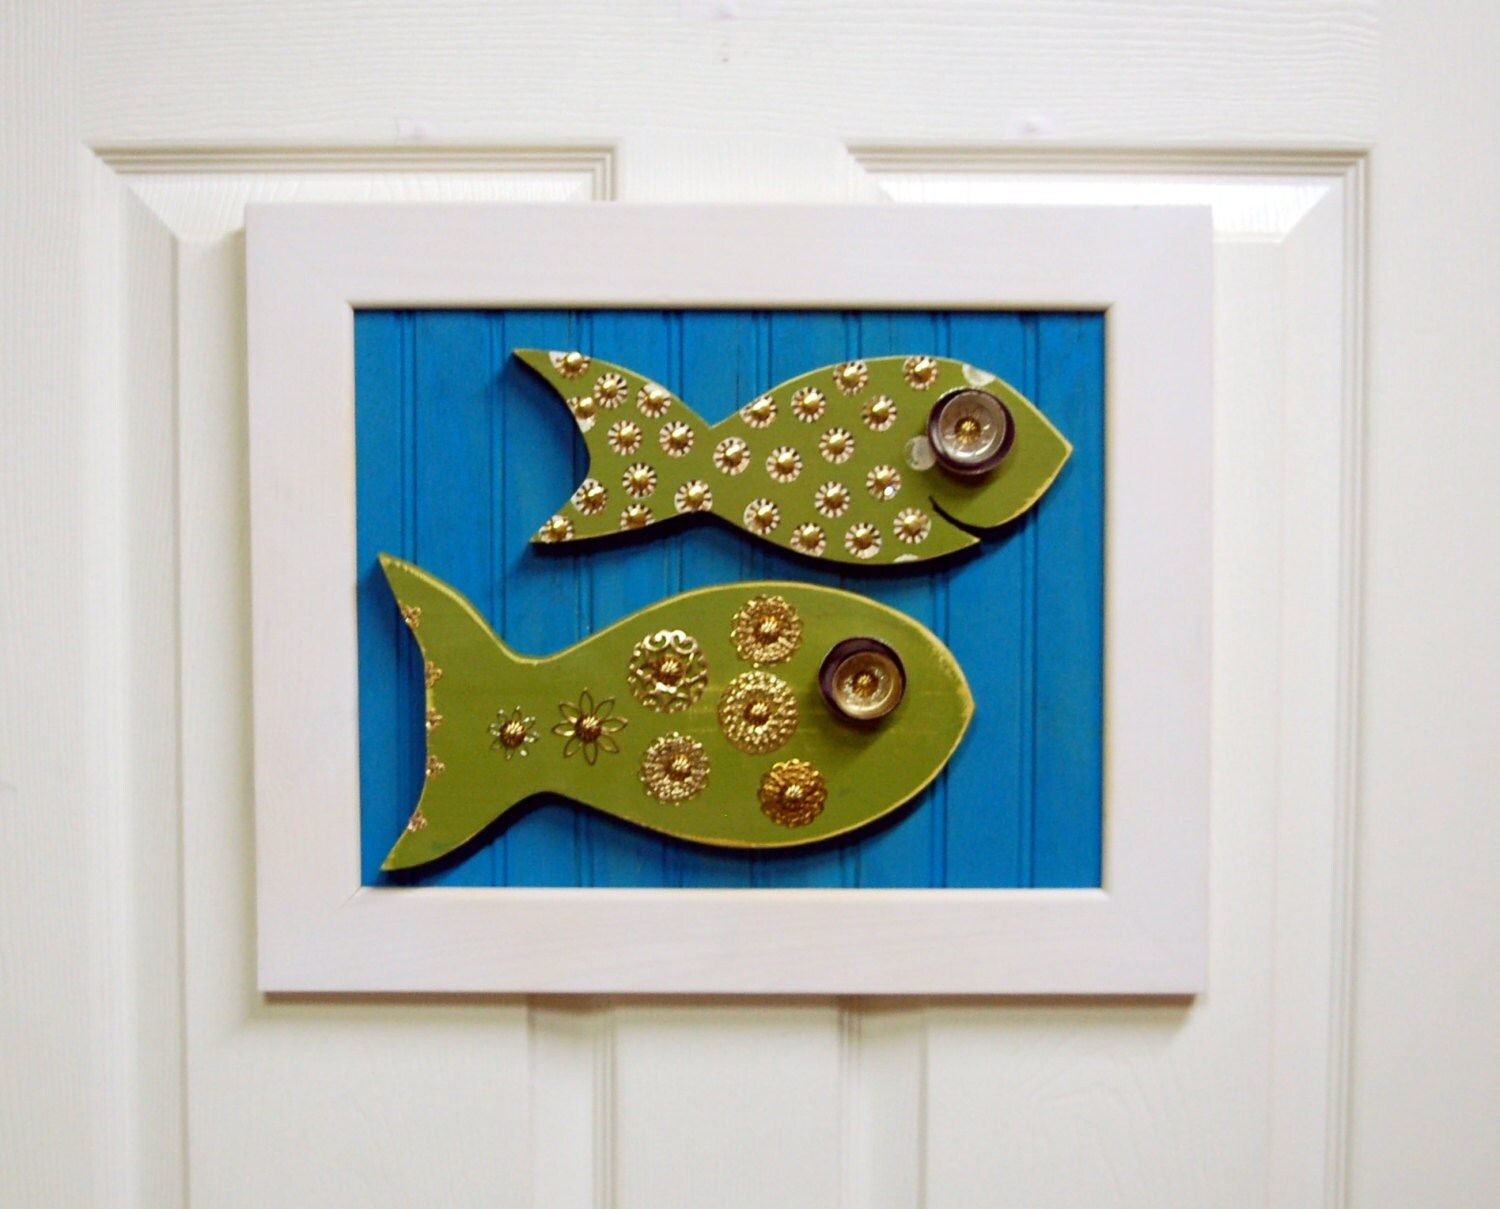 Fish Wall Art 3 Dimensional Framed Recycled Fish Oak Art Throughout 3 Dimensional Wall Art (View 9 of 15)